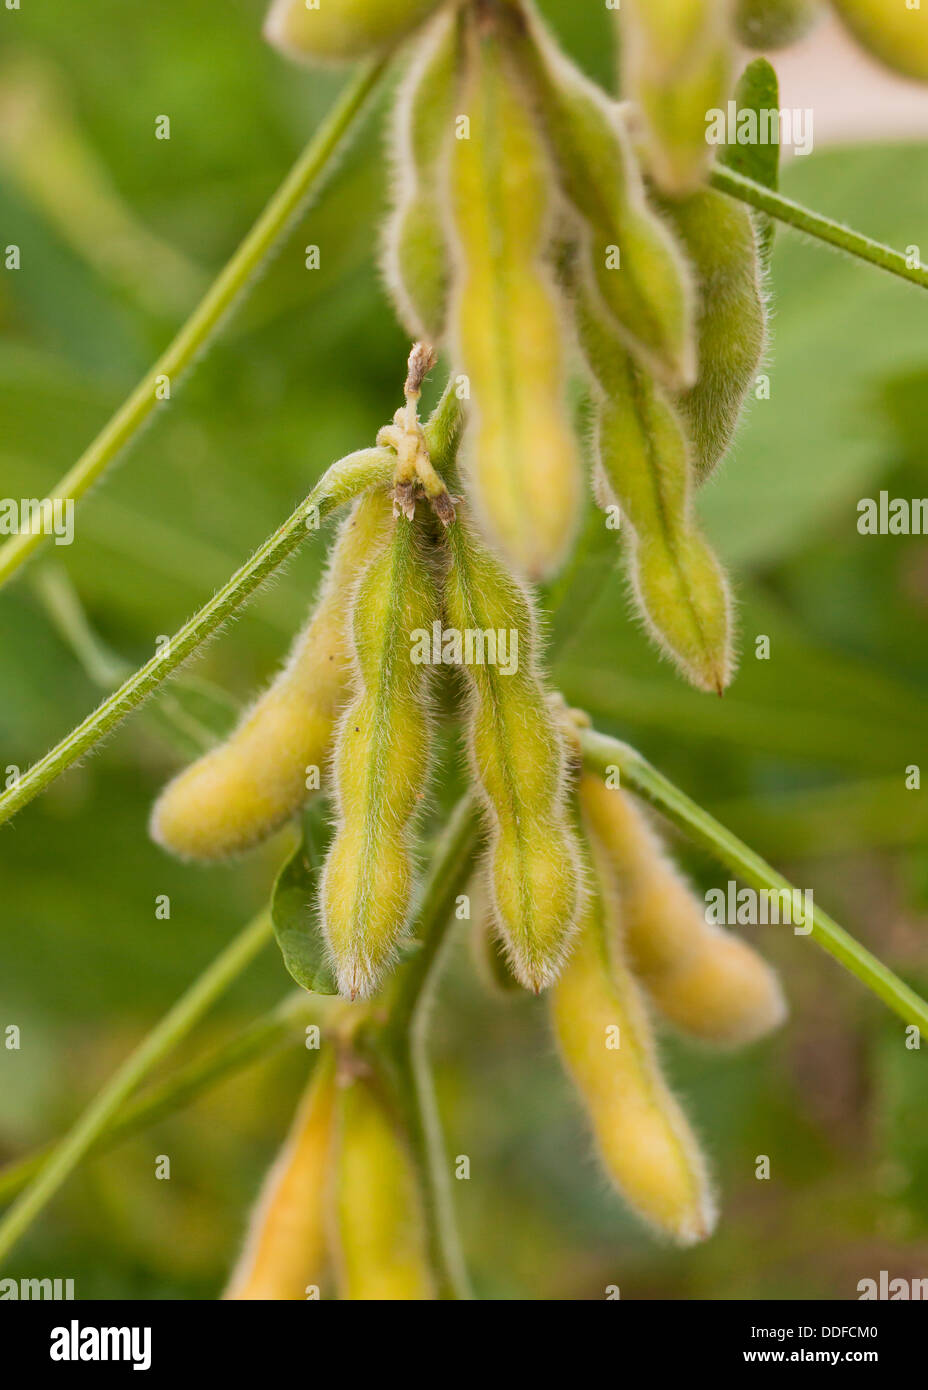 Soybean pods on branch (Glycine max) Stock Photo